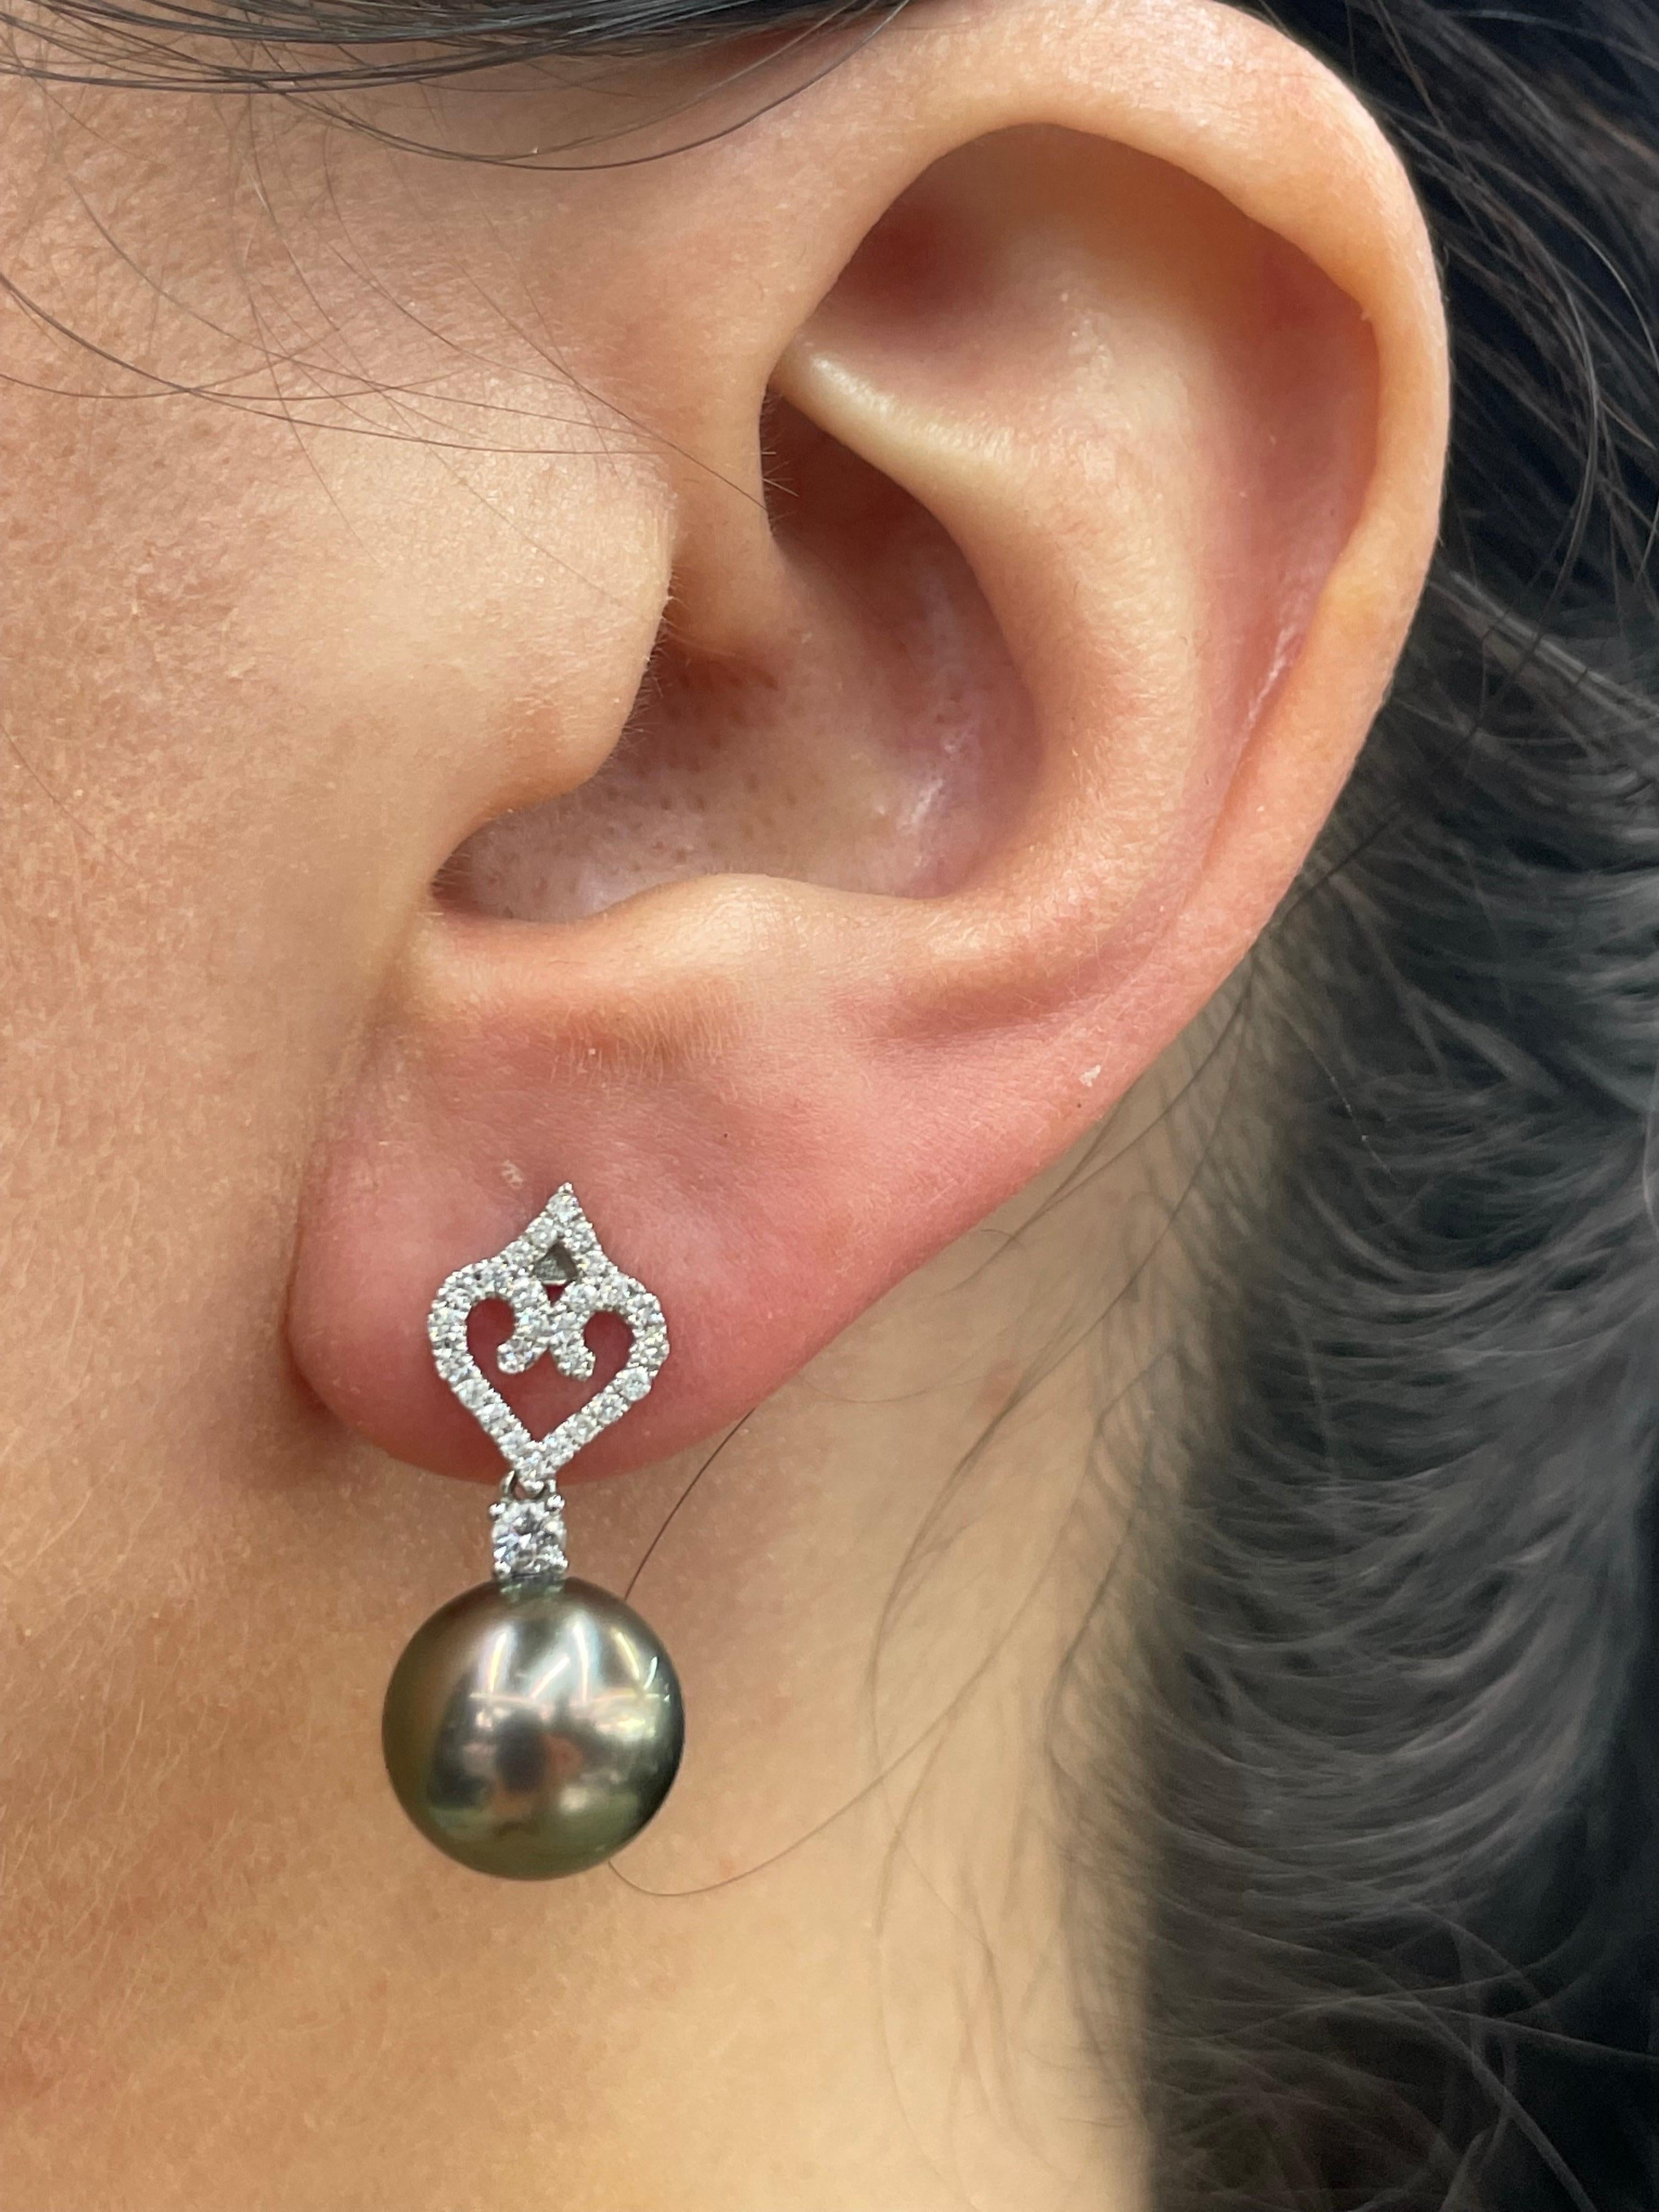 18 Karat White Gold heart motif drop earrings featuring 52 small diamonds weighing 0.26 Carats, two Round Brilliants weighing 0.12 Carats and Tahitian Pearls measuring 10-11 MM. 
Can customize Pearl color & size.
DM for more information. 